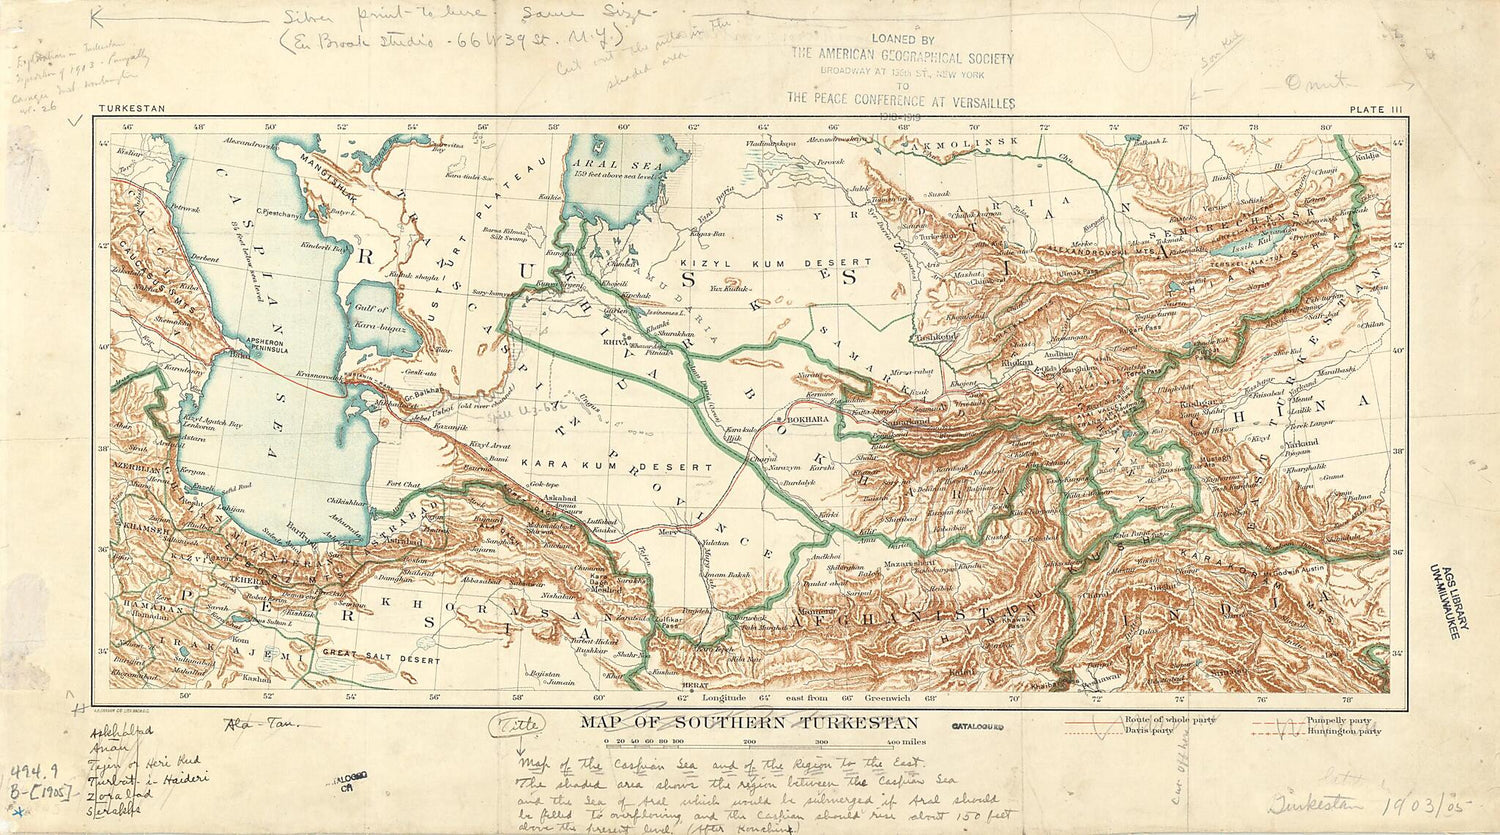 This old map of Map of Southern Turkestan from 1905 was created by  Carnegie Institution of Washington,  United States. Department of State in 1905